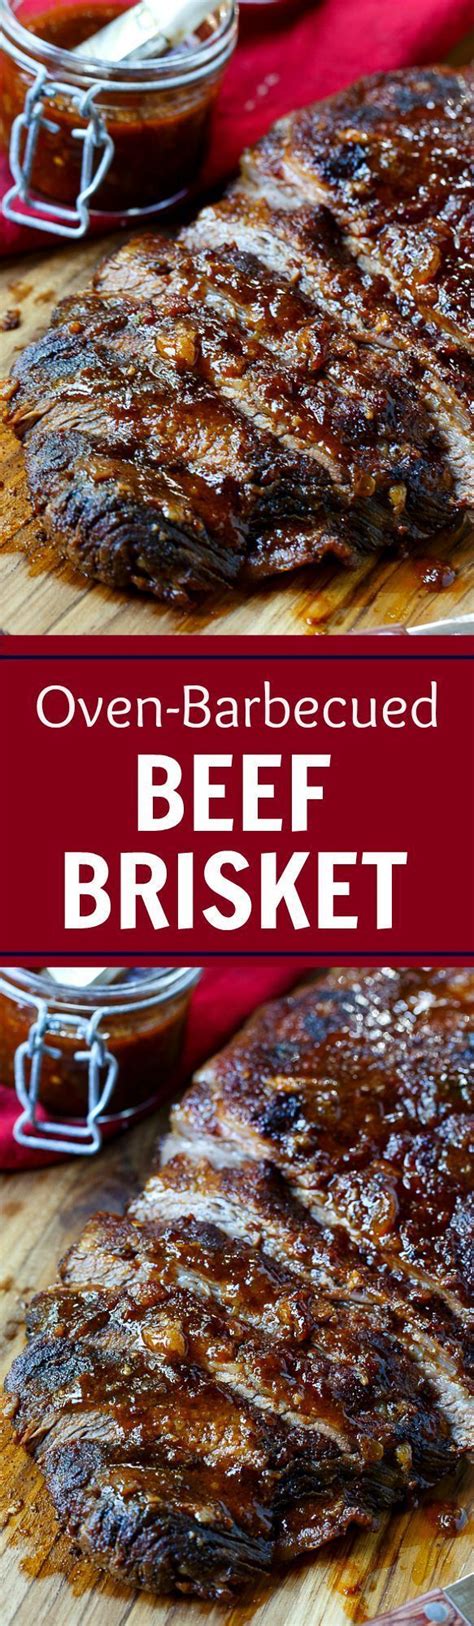 It can be made in your slow cooker, pressure cooker or oven! Oven-Barbecued Beef Brisket | Recipe | Beef recipes, Food ...